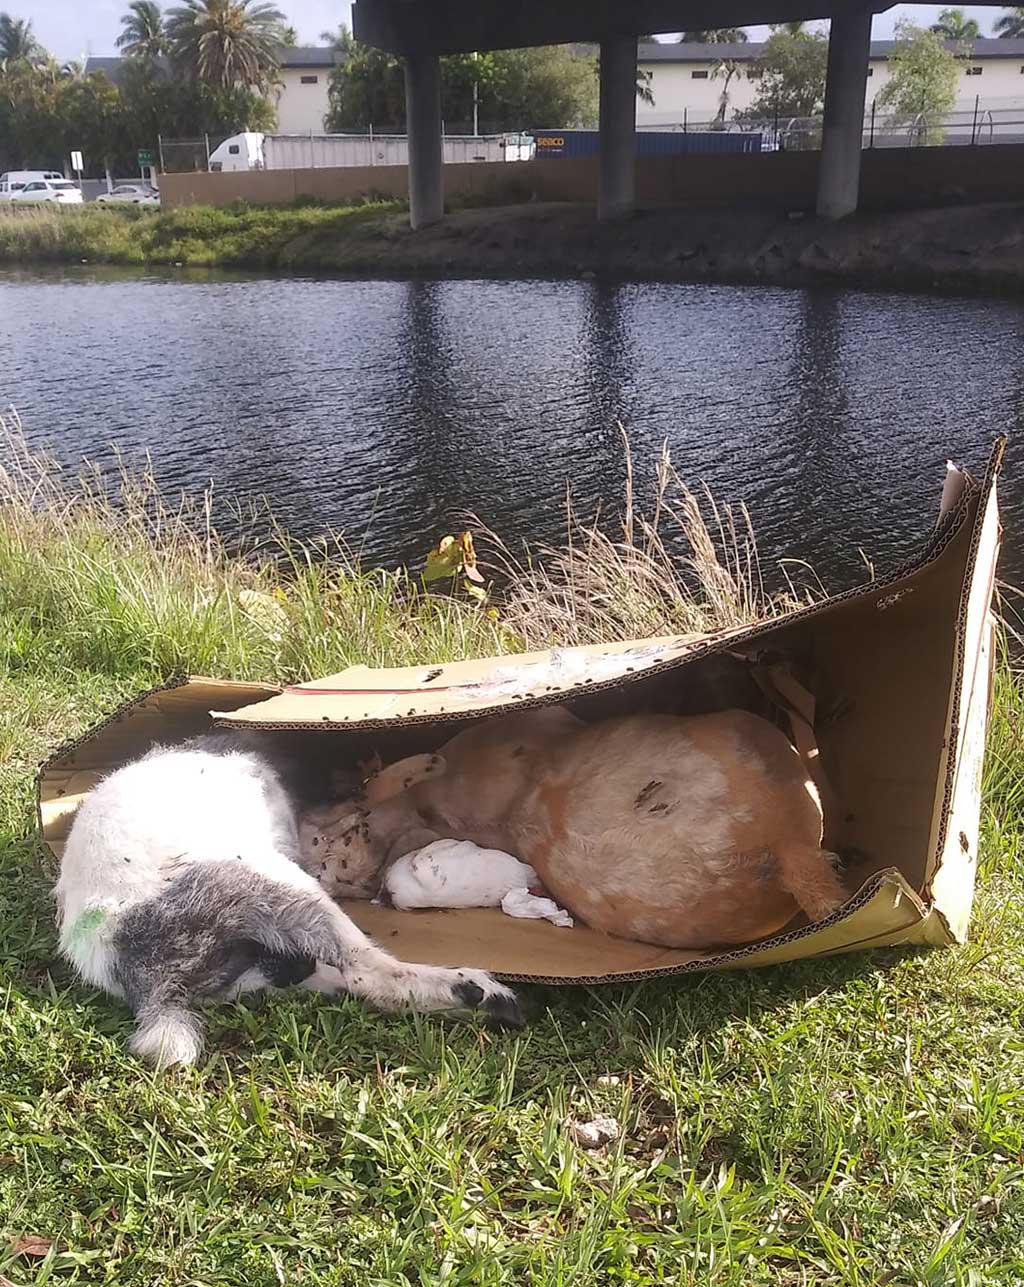 Photo of dead animals posted by Ralph Nuñez via the Miami Springs Community Facebook Group